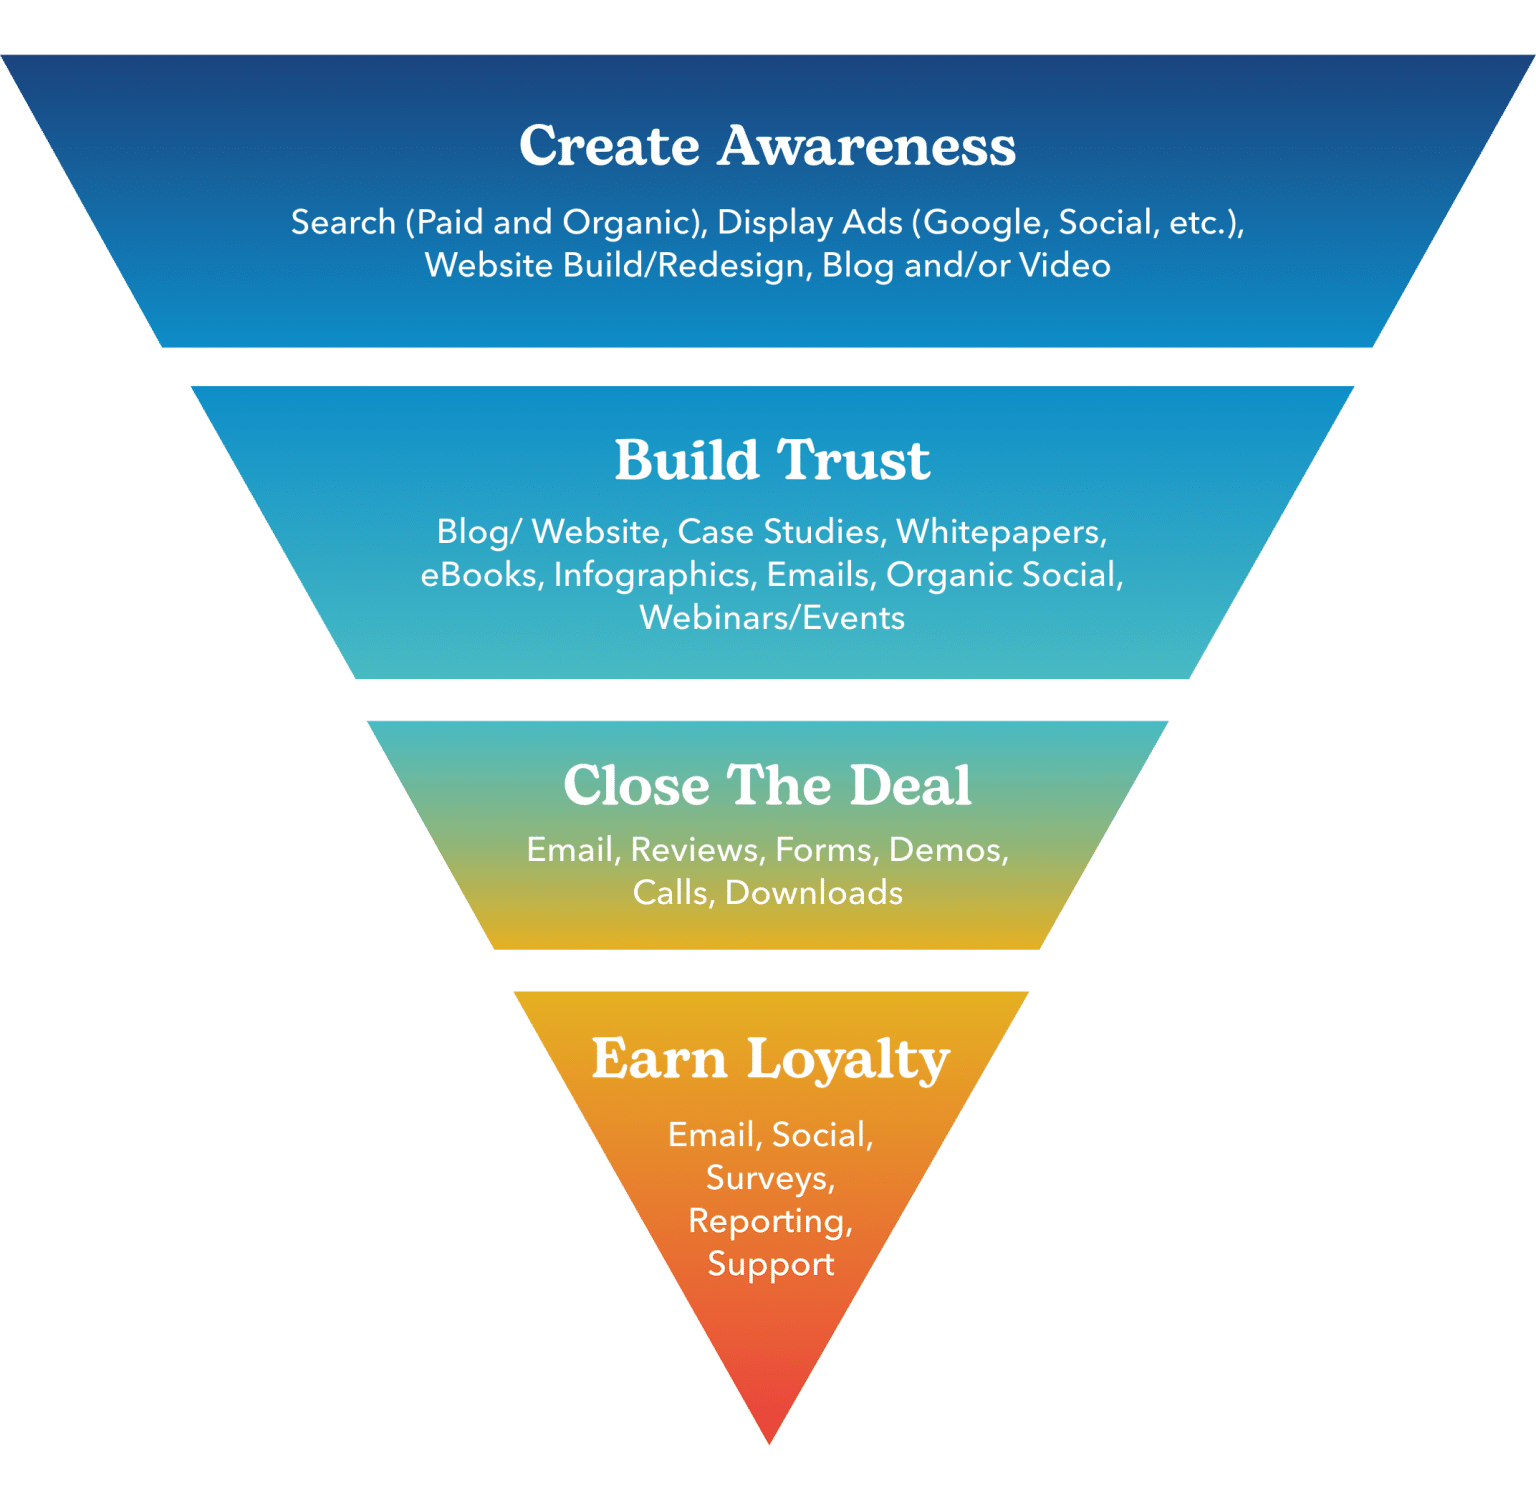 Marketing funnel broken down from (top) create awareness, build trust, close the deal, and (bottom) earn loyalty